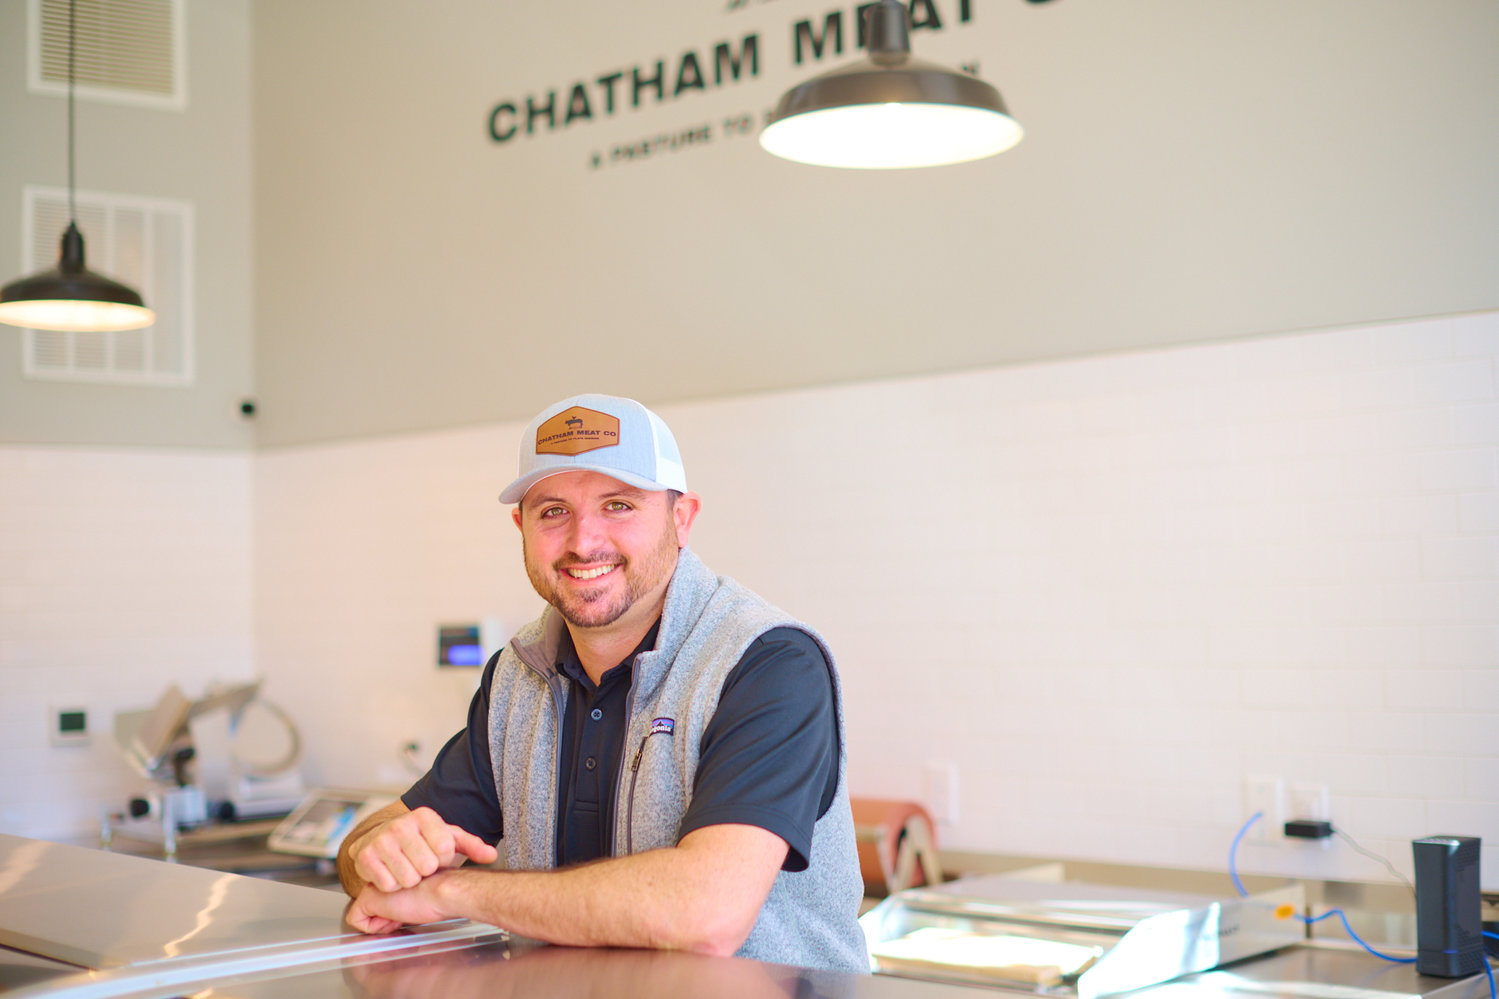 Chris Beal is the owner of Chatham Meat Company and Tribeca Hospitality. As a Chatham County native, he hopes to bring the 'pasture to plate' mission to his hometown.